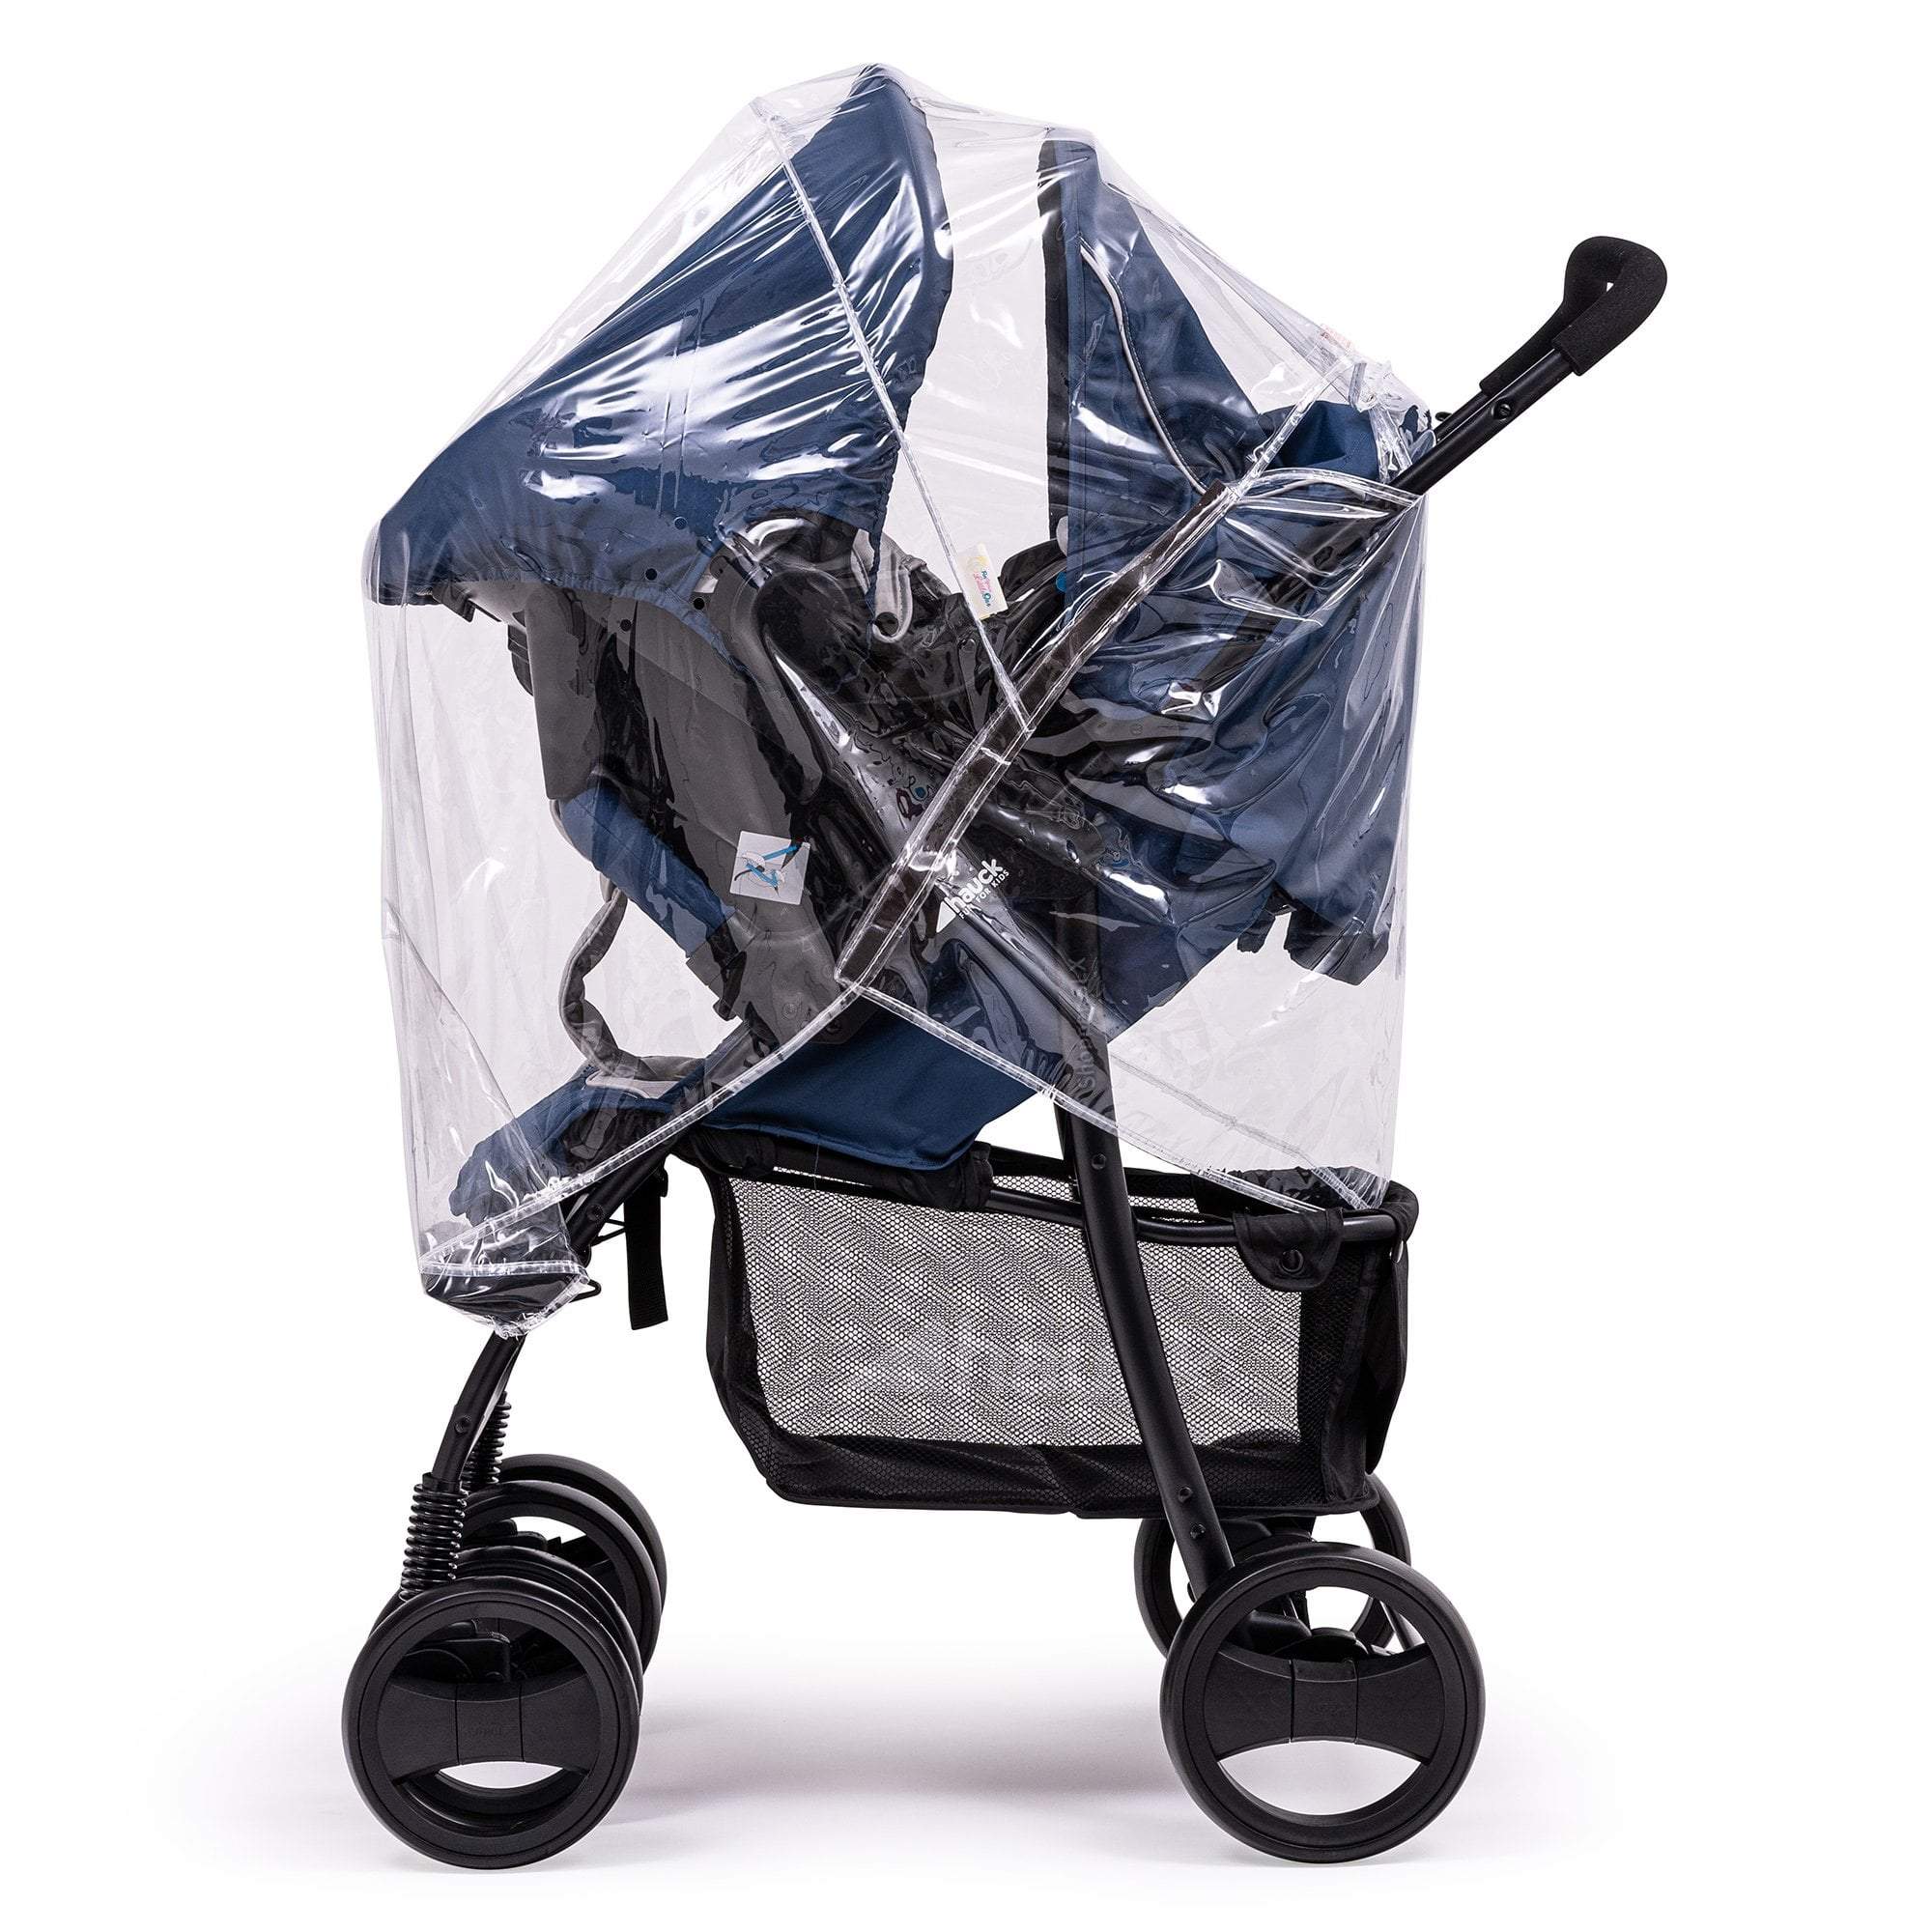 Travel System Raincover Compatible with BabyDan - Fits All Models - For Your Little One